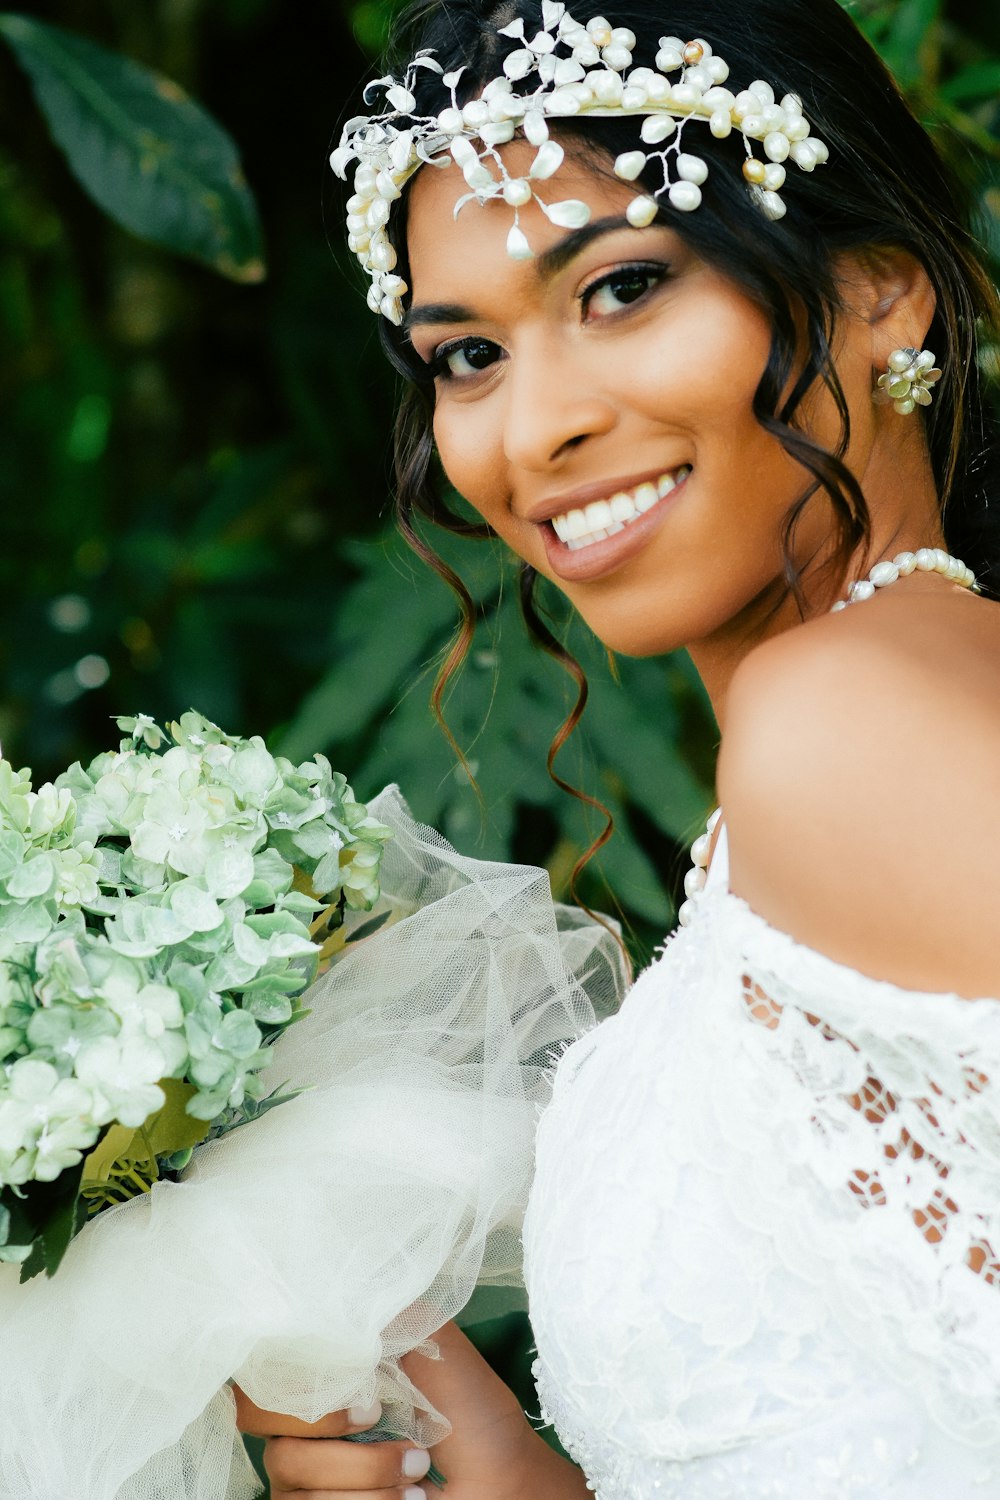 smiling woman in white floral dress wearing white floral crown photo – Free  Costa rica Image on Unsplash